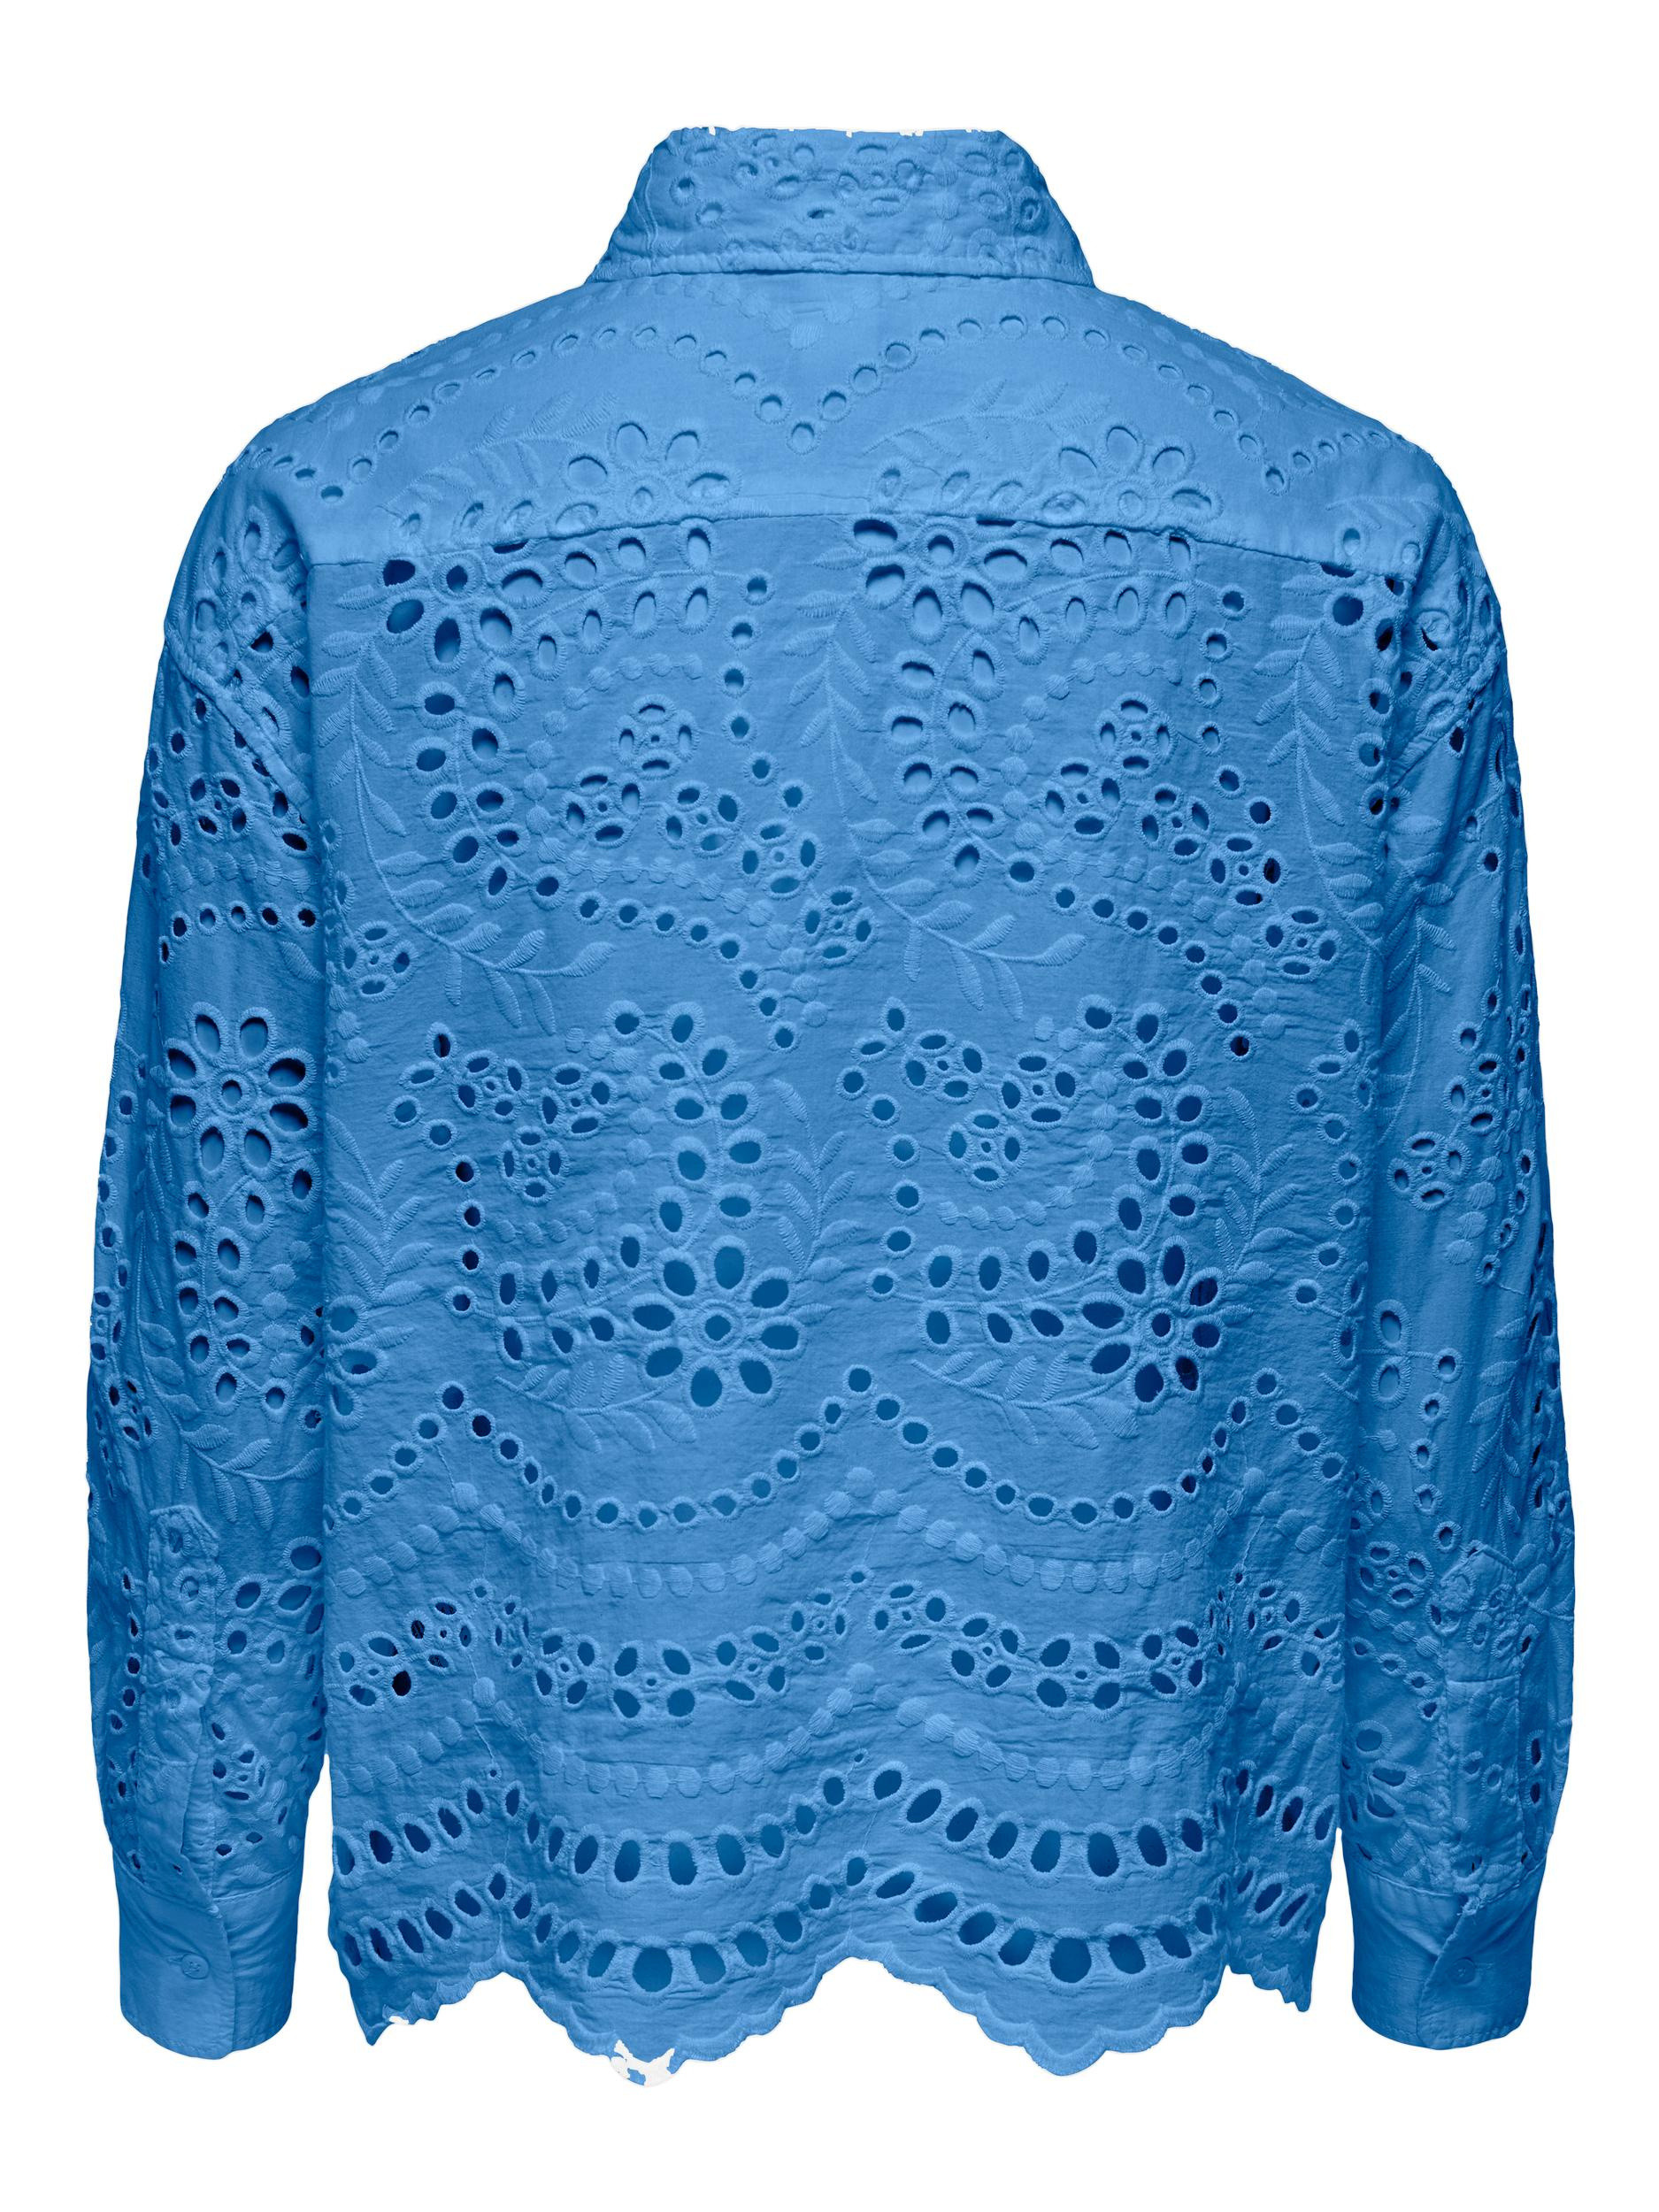 Only - Boxy fit lace shirt, Light Blue, large image number 1